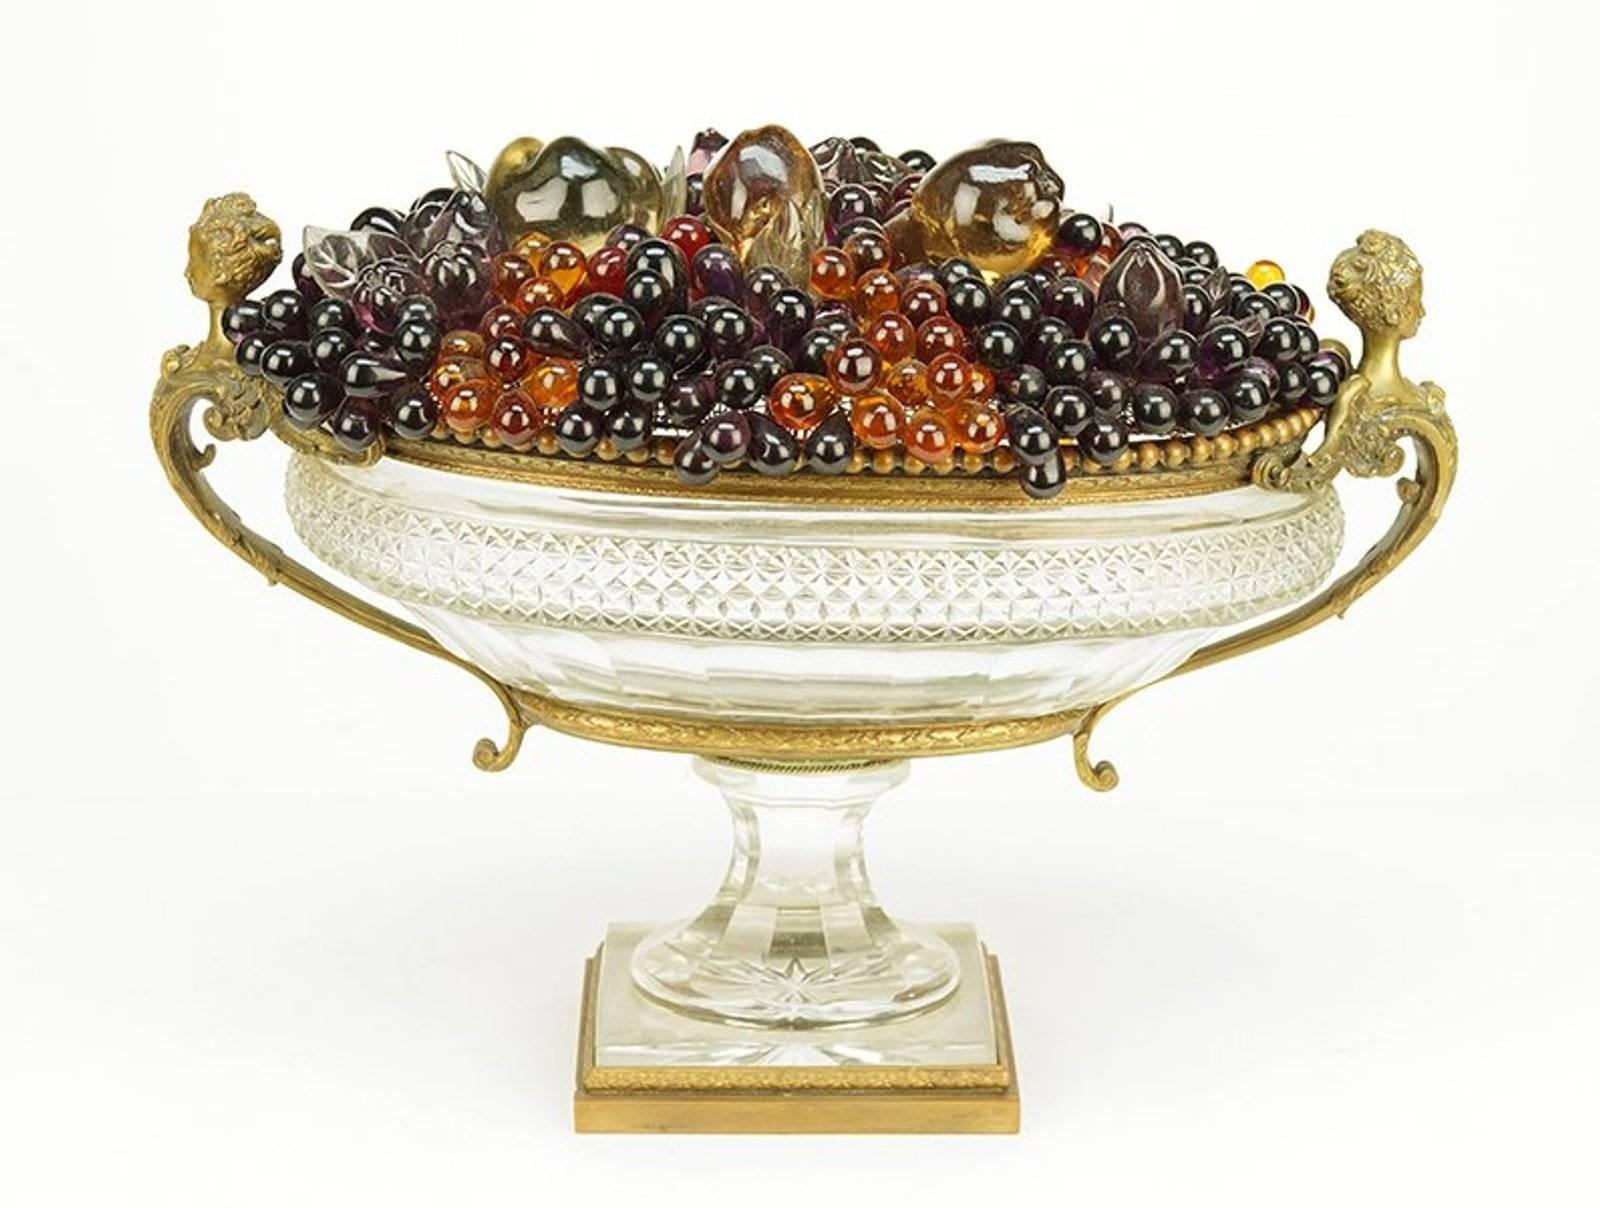 A French bronze and crystal centre bowl. Square bronze base supports a tapered crystal pedestal and oval bowl with winged maiden form handles. Underside is stamped 